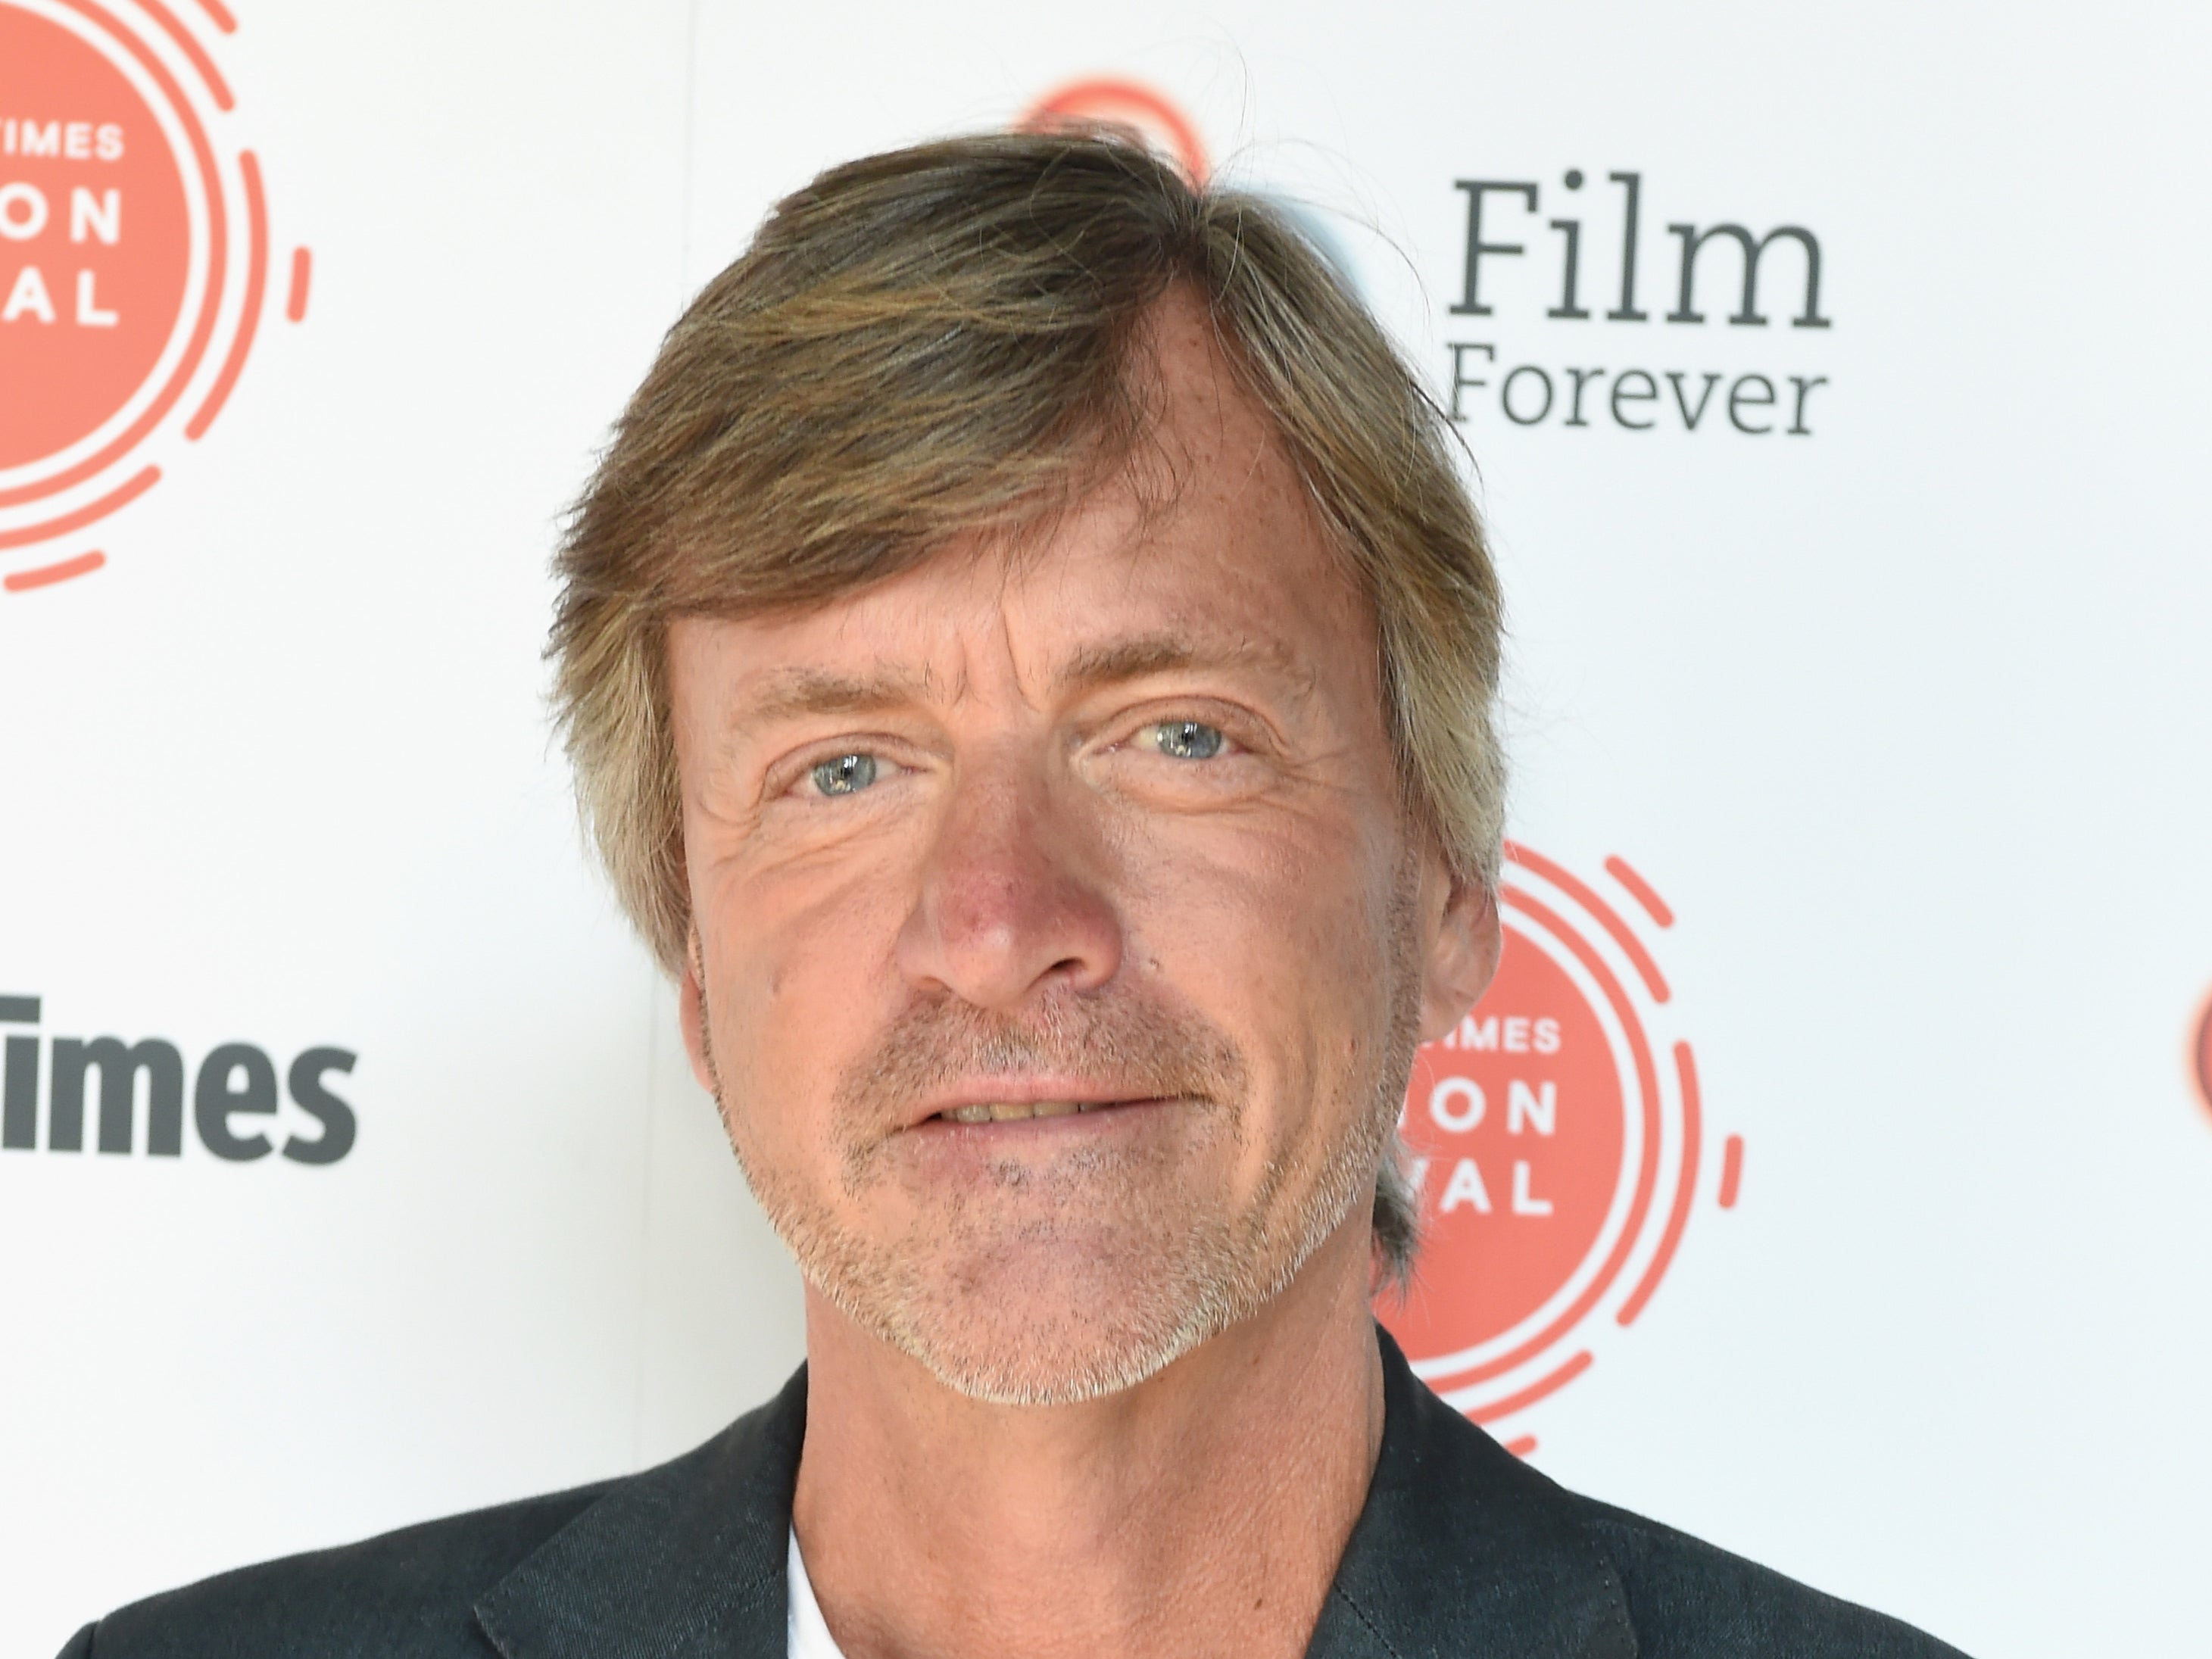 Richard Madeley is taking part in ‘I’m a Celebrity... Get Me Out of Here!’